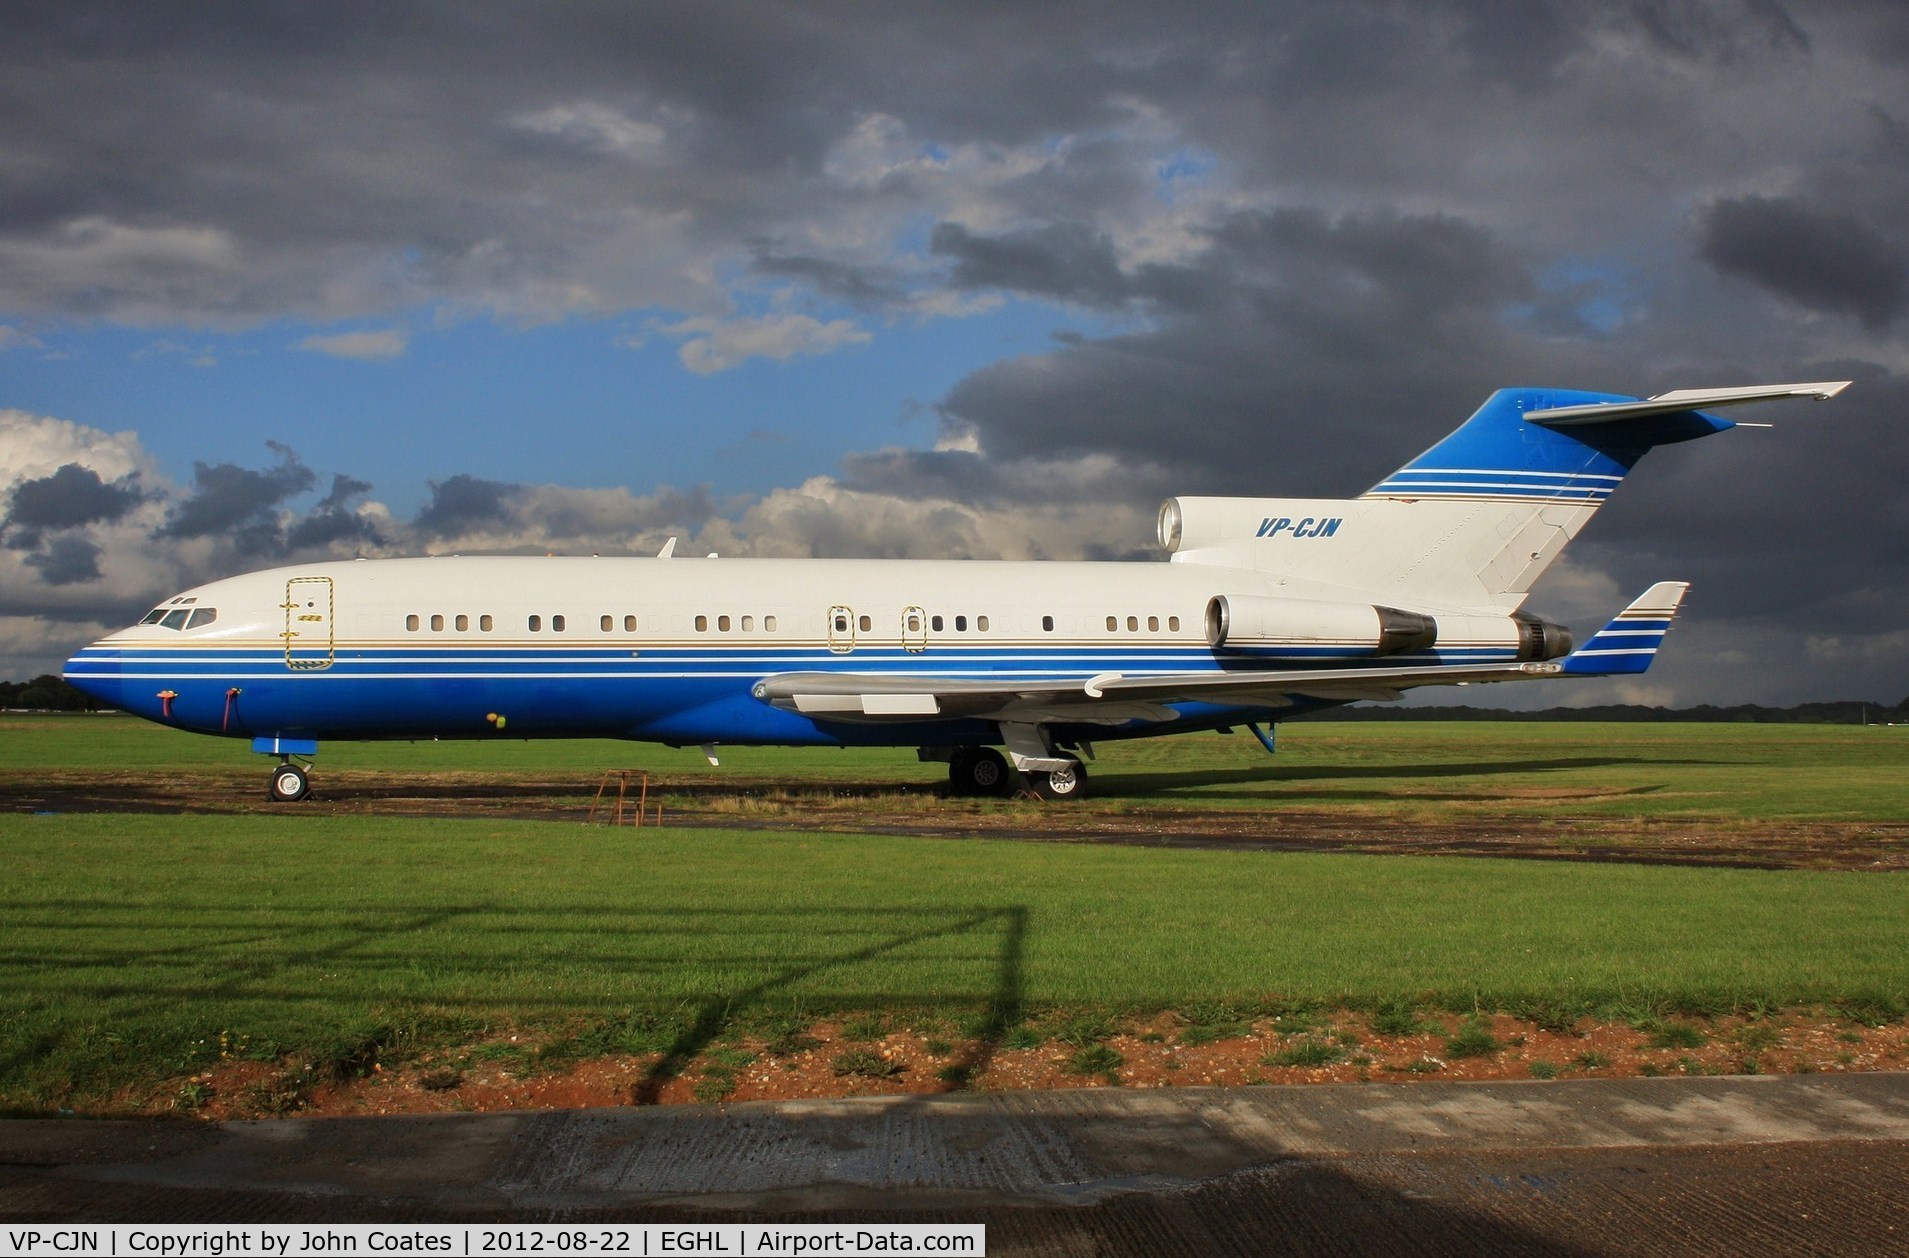 VP-CJN, 1970 Boeing 727-76 C/N 20371, After the storm at ATC